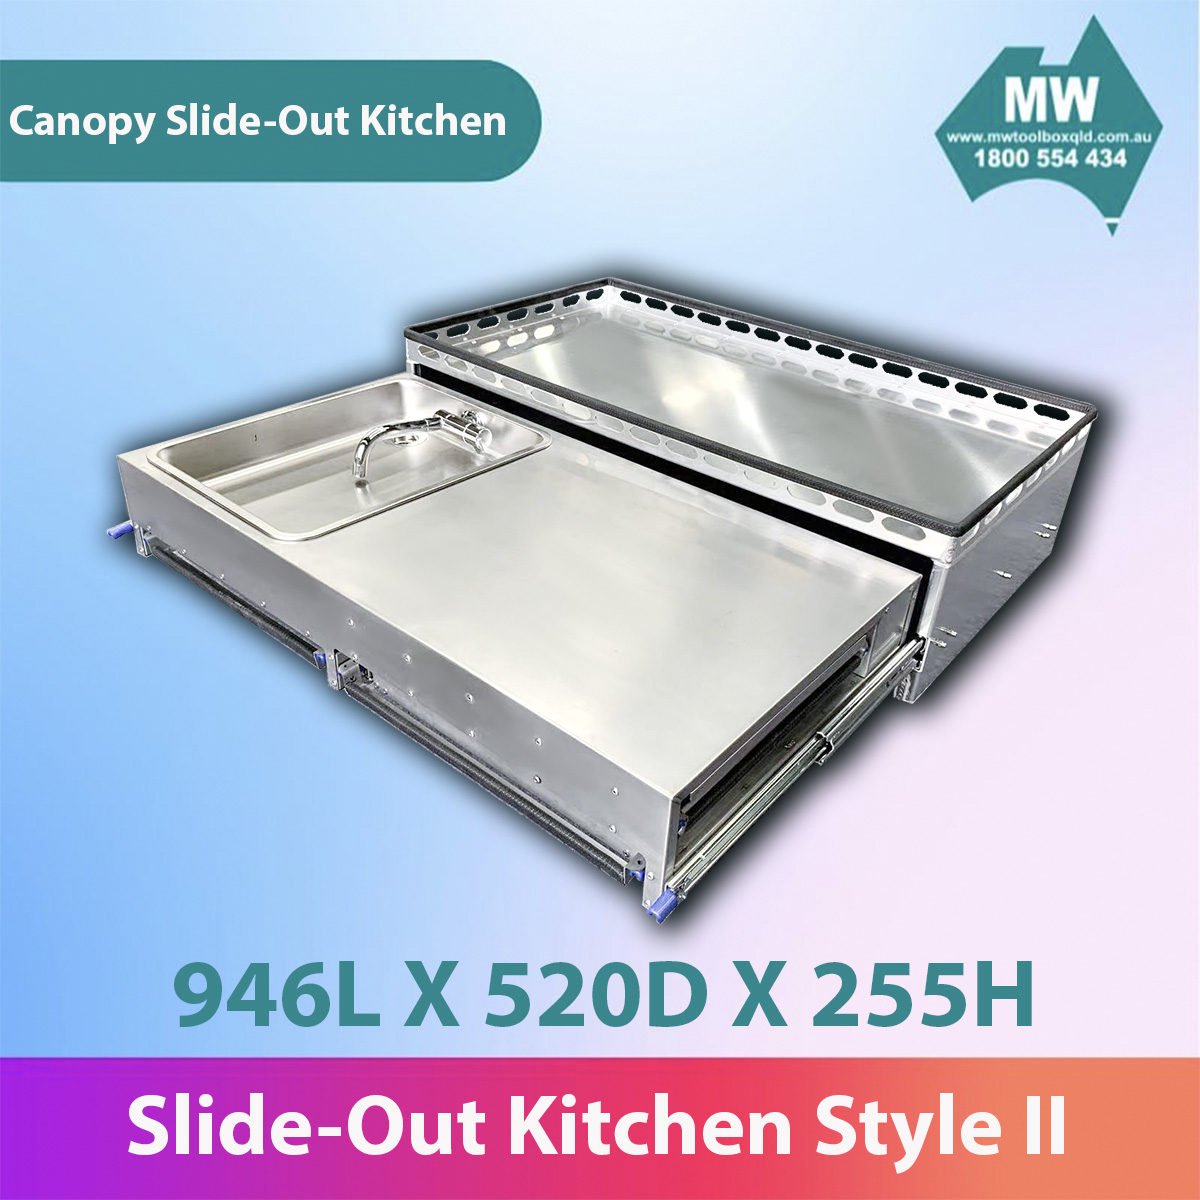 MW SLIDE OUT KITCHEN CANOPY KITCHEN STYLE II-2